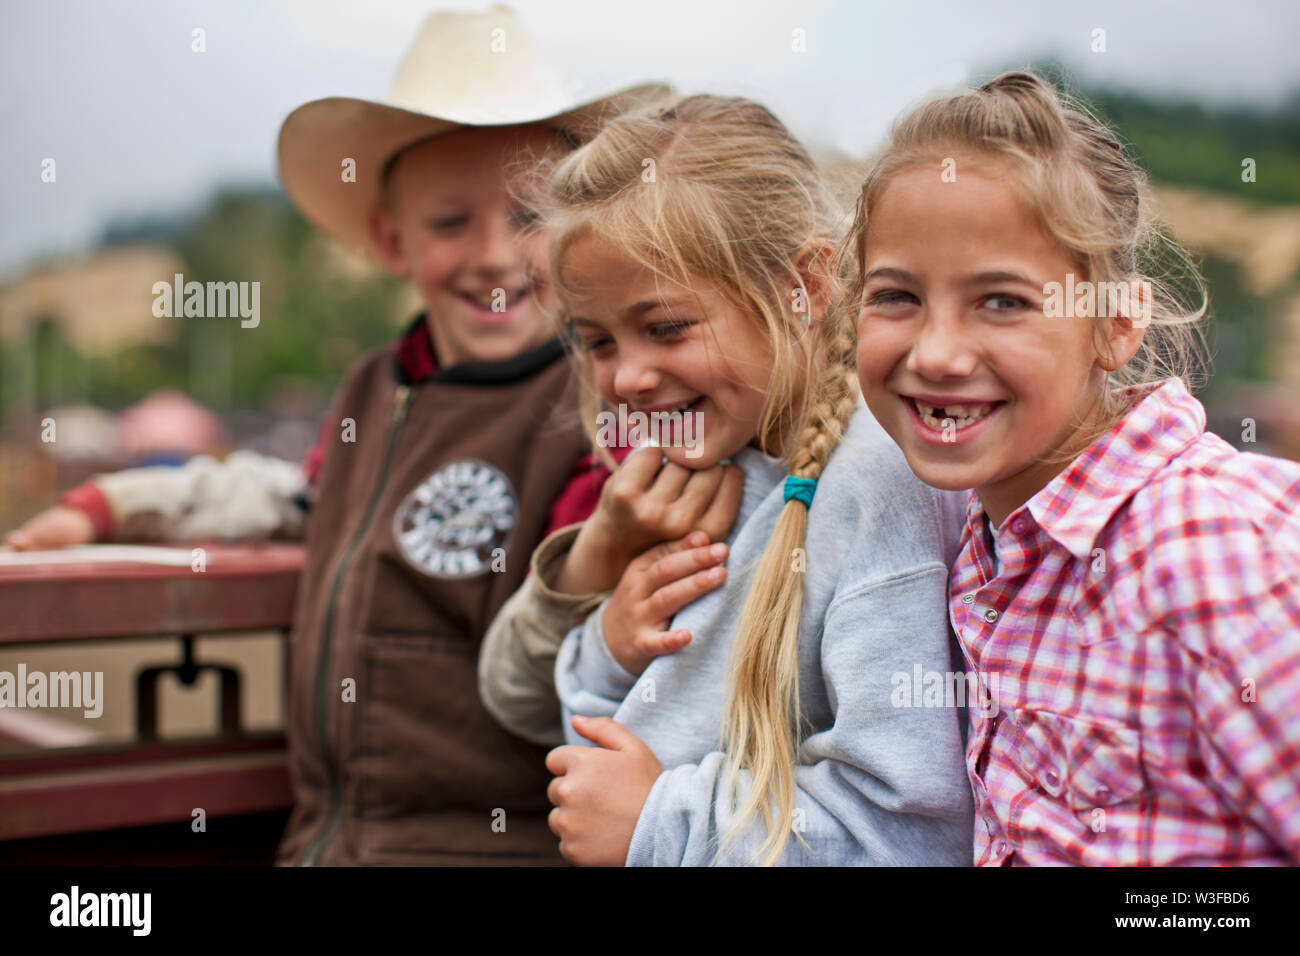 Portrait of three smiling siblings at a ranch. Stock Photo